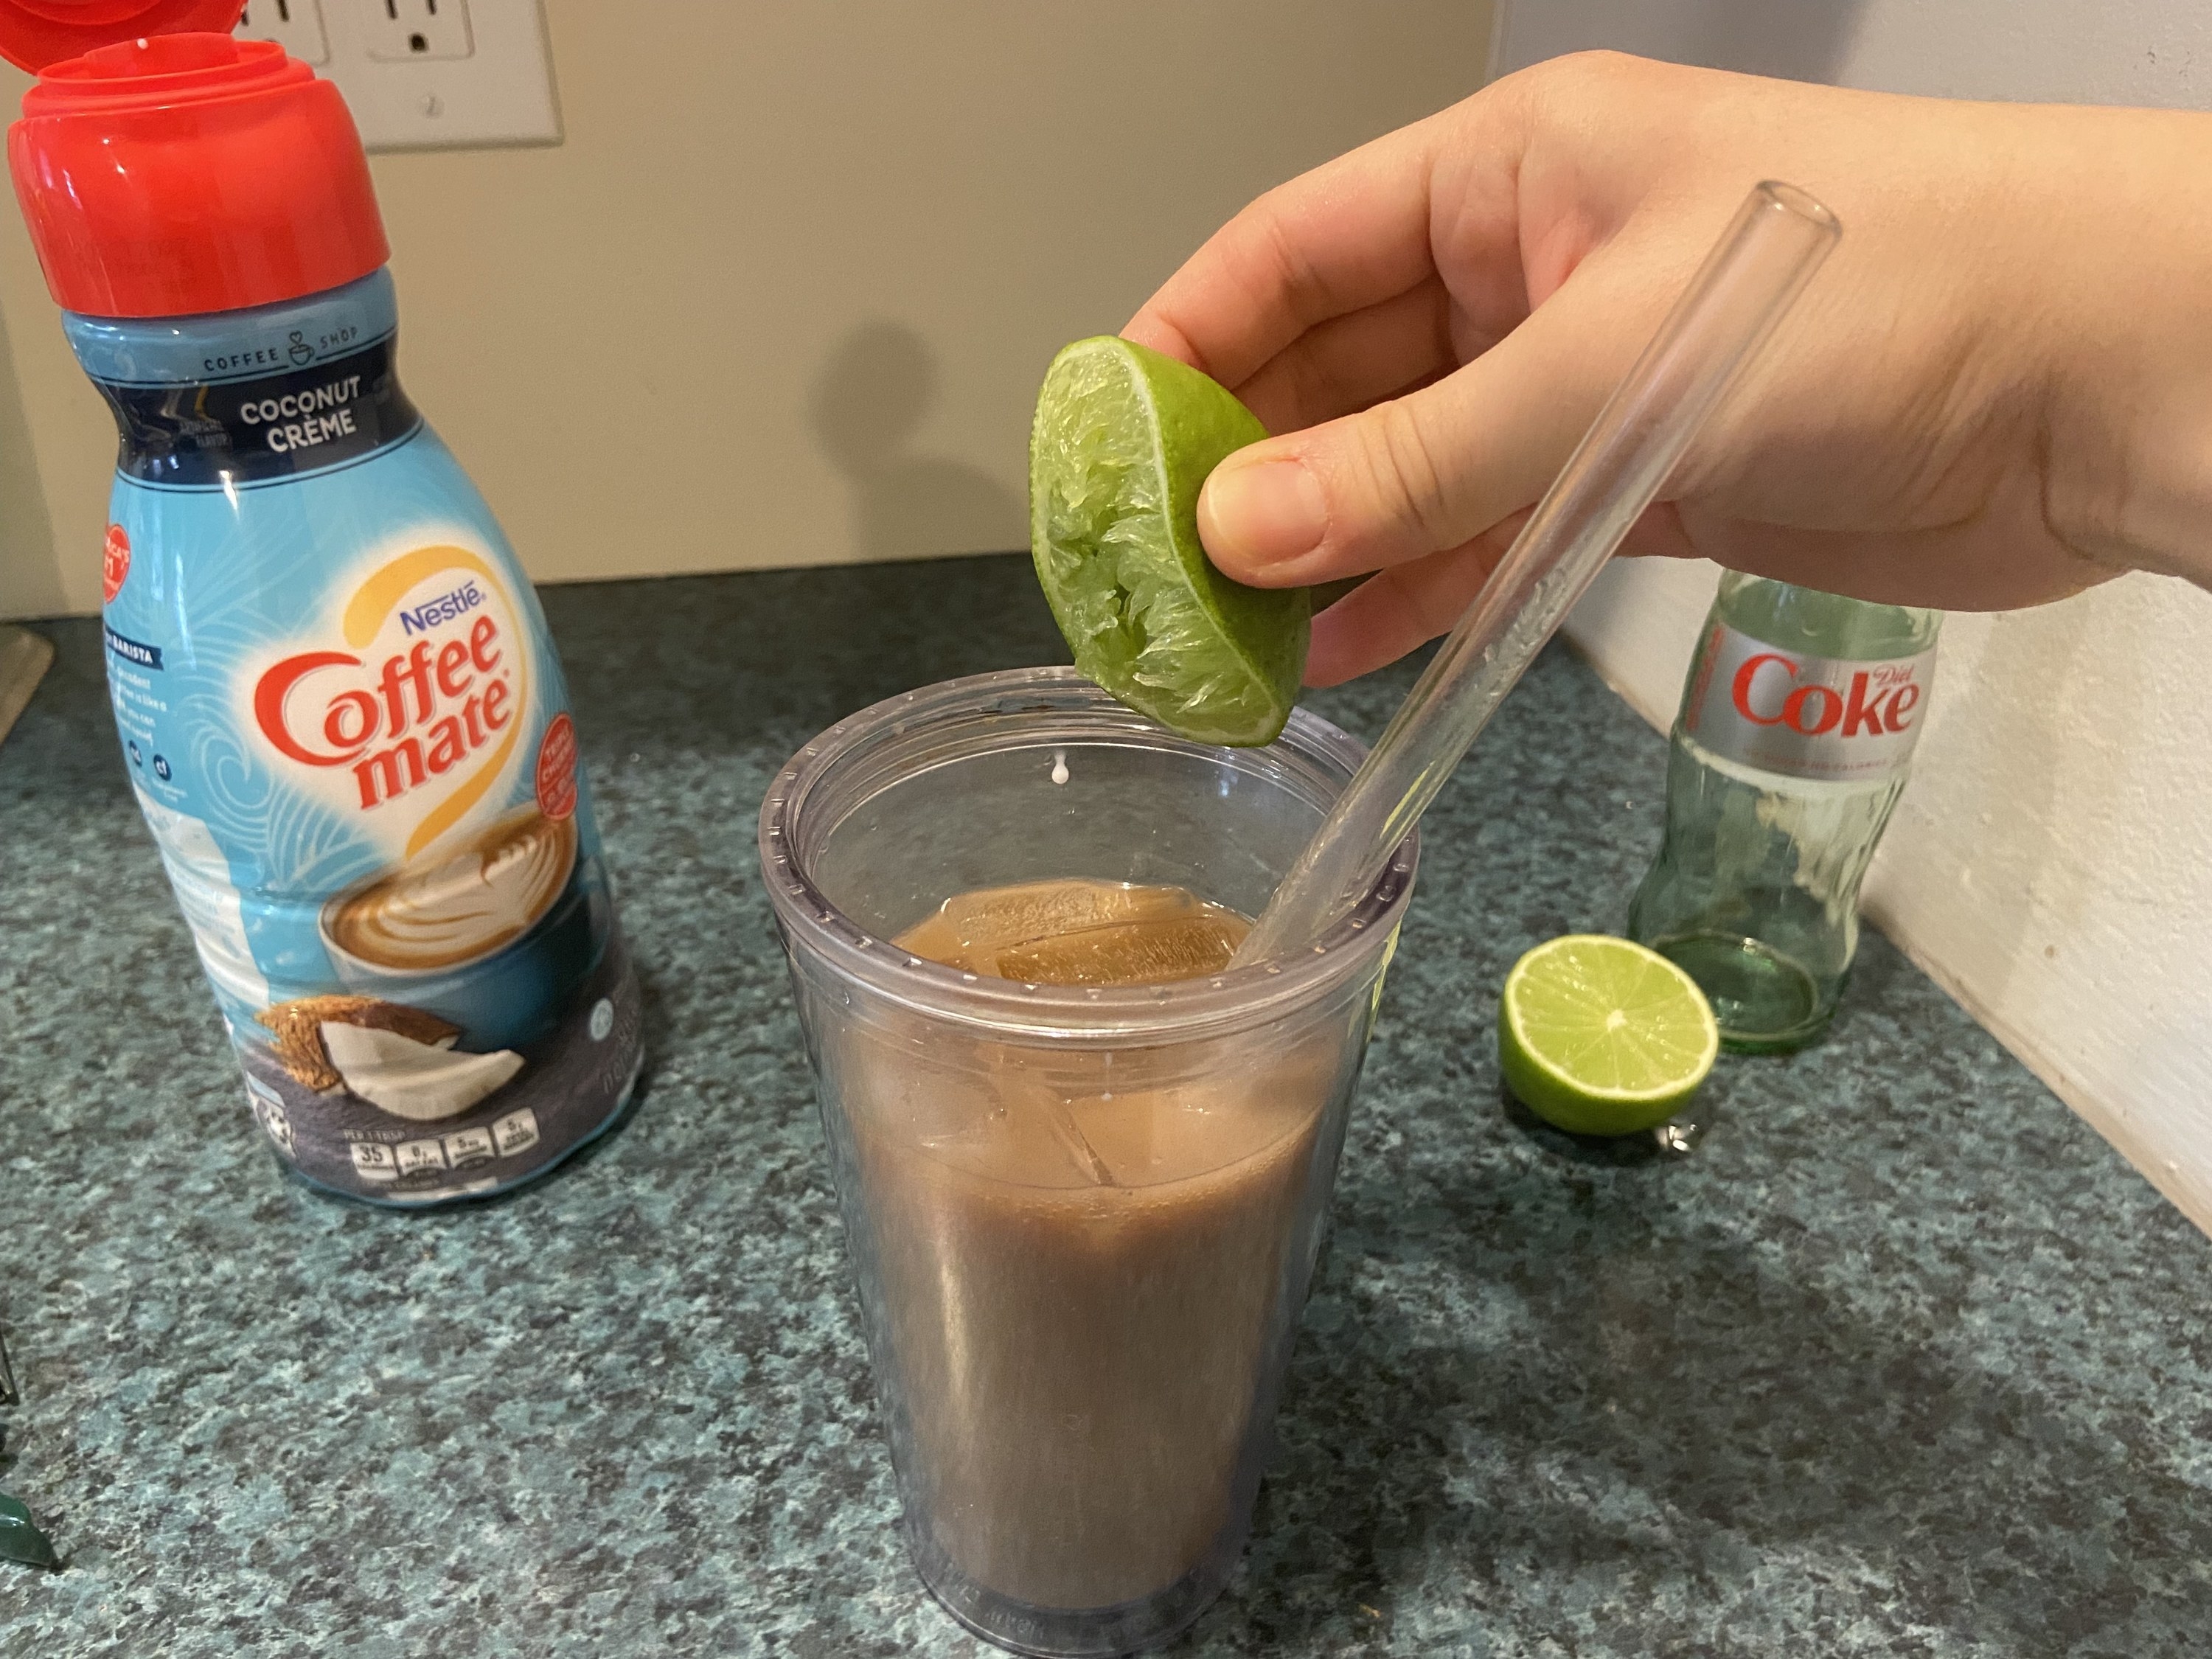 The author squeezing half a lime into her glass of diet coke and coffee creamer